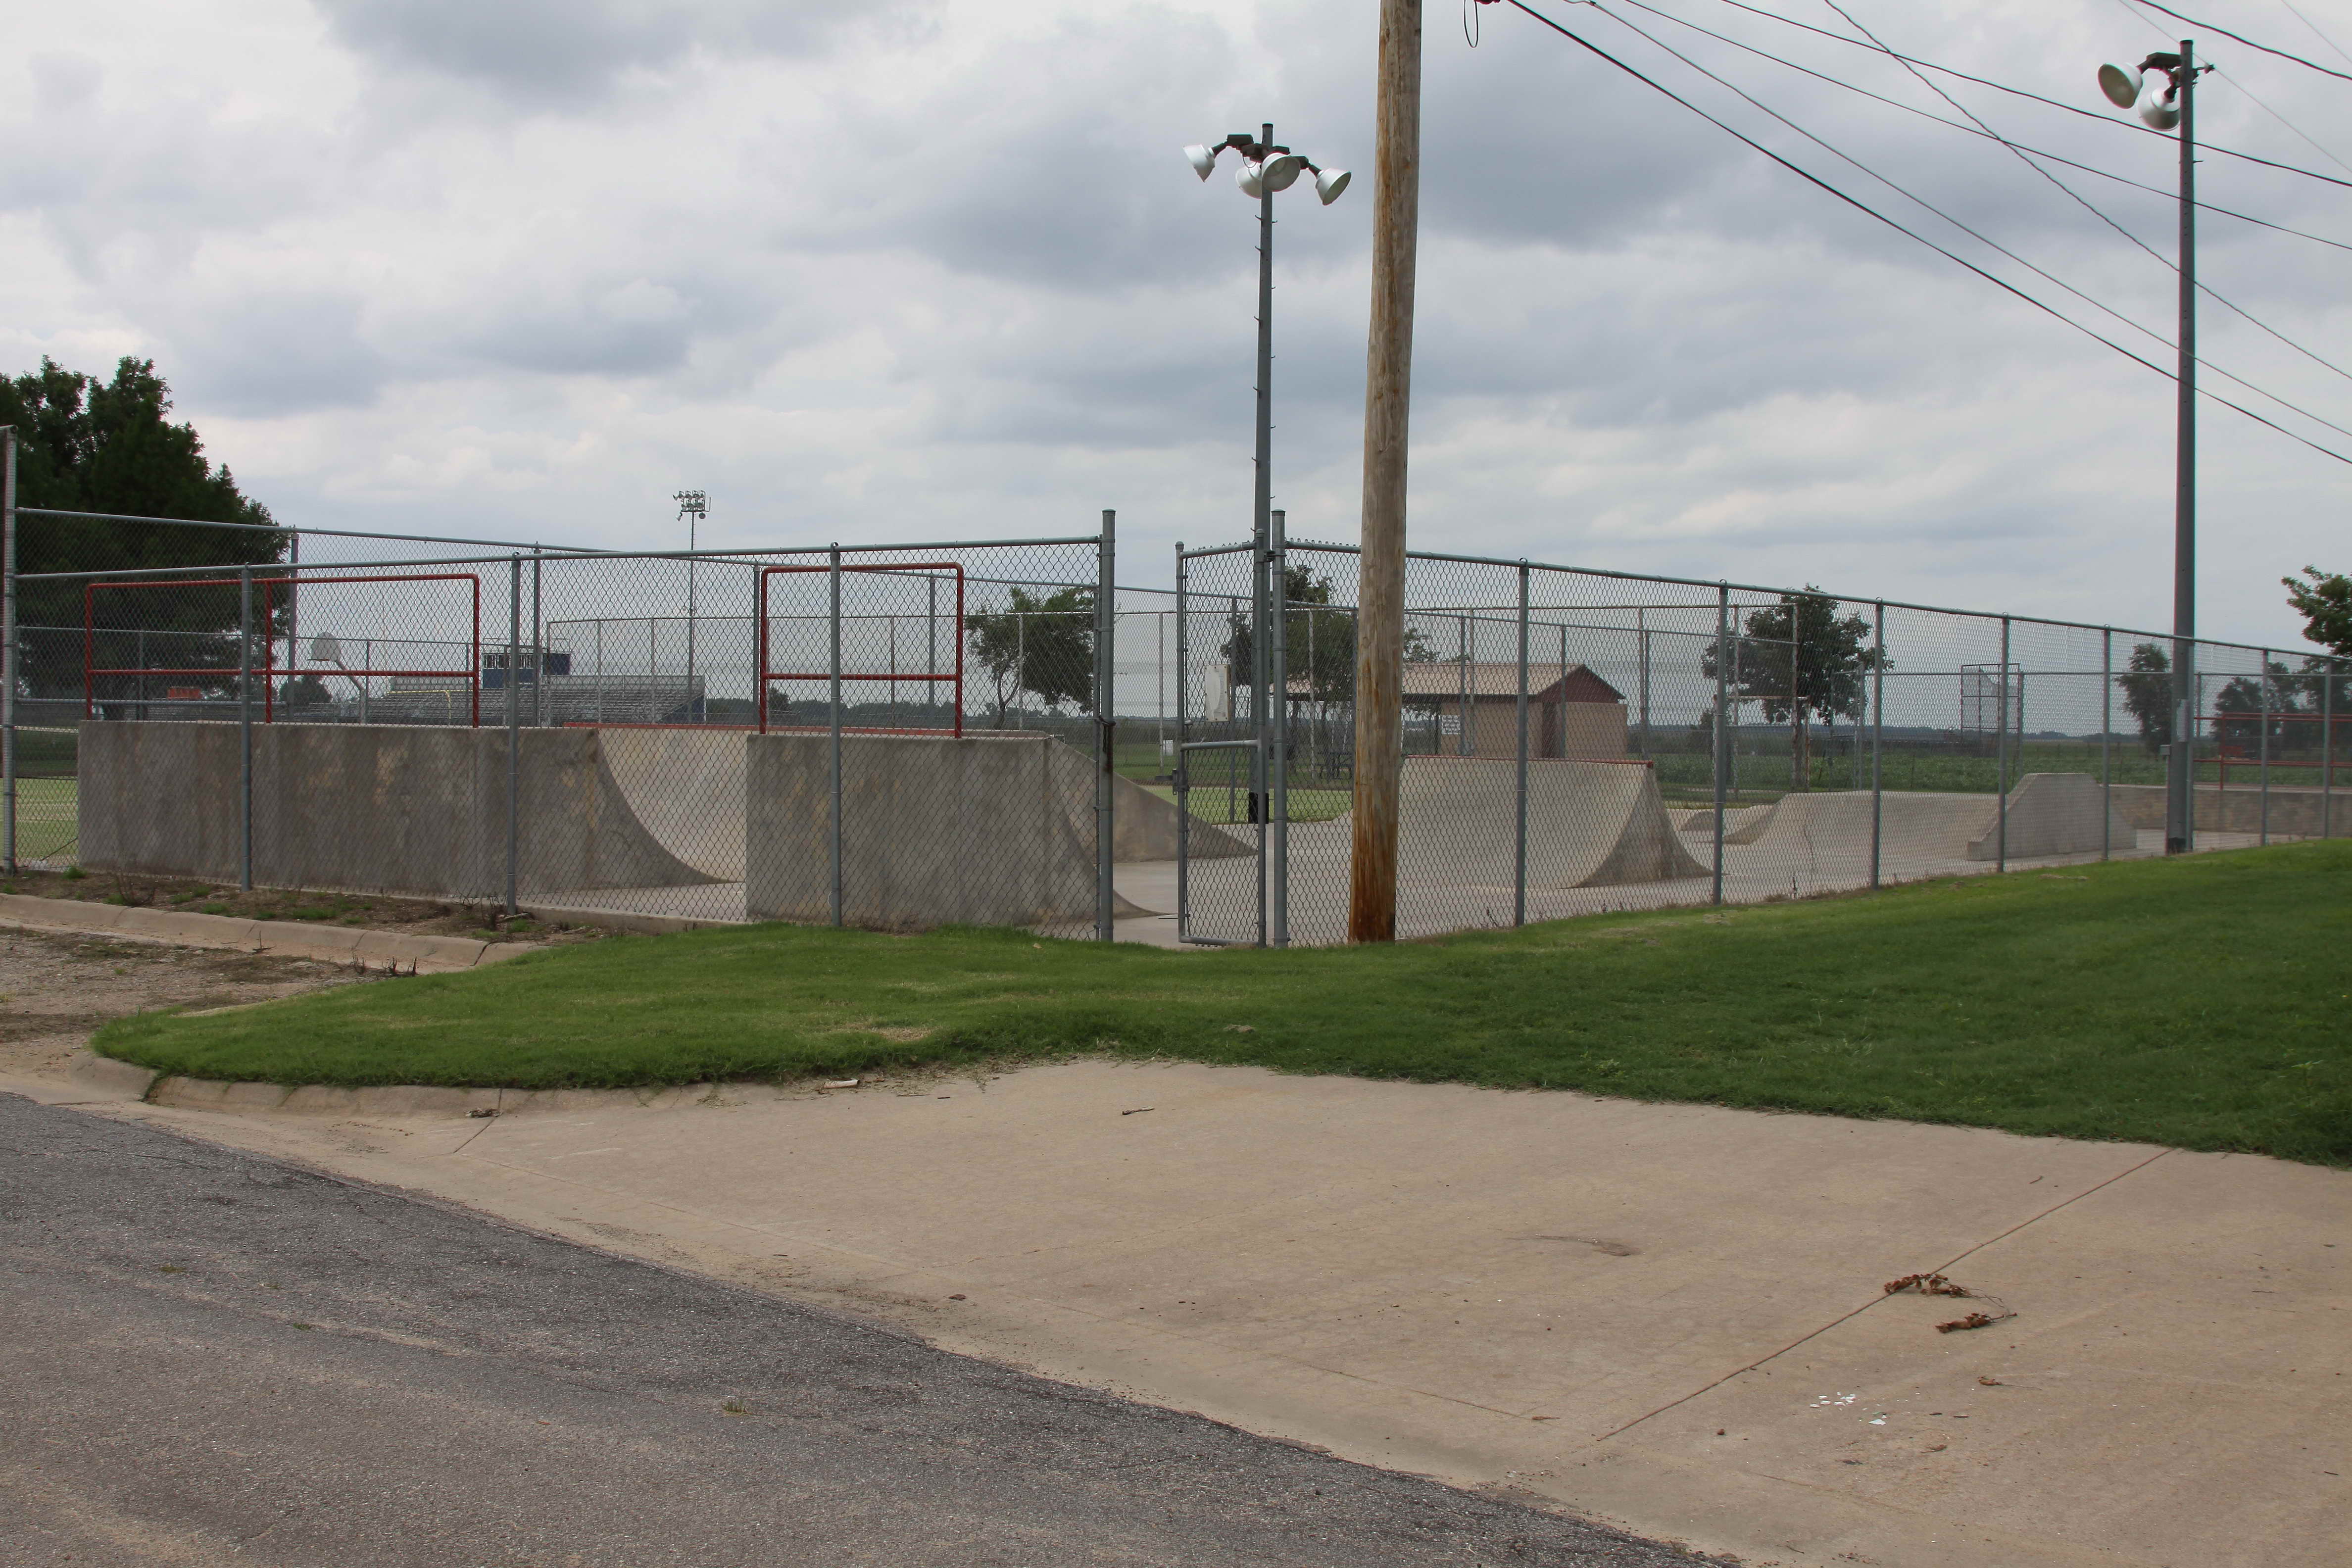 Skateboard park (part of the Sports Complex on the north end of town)